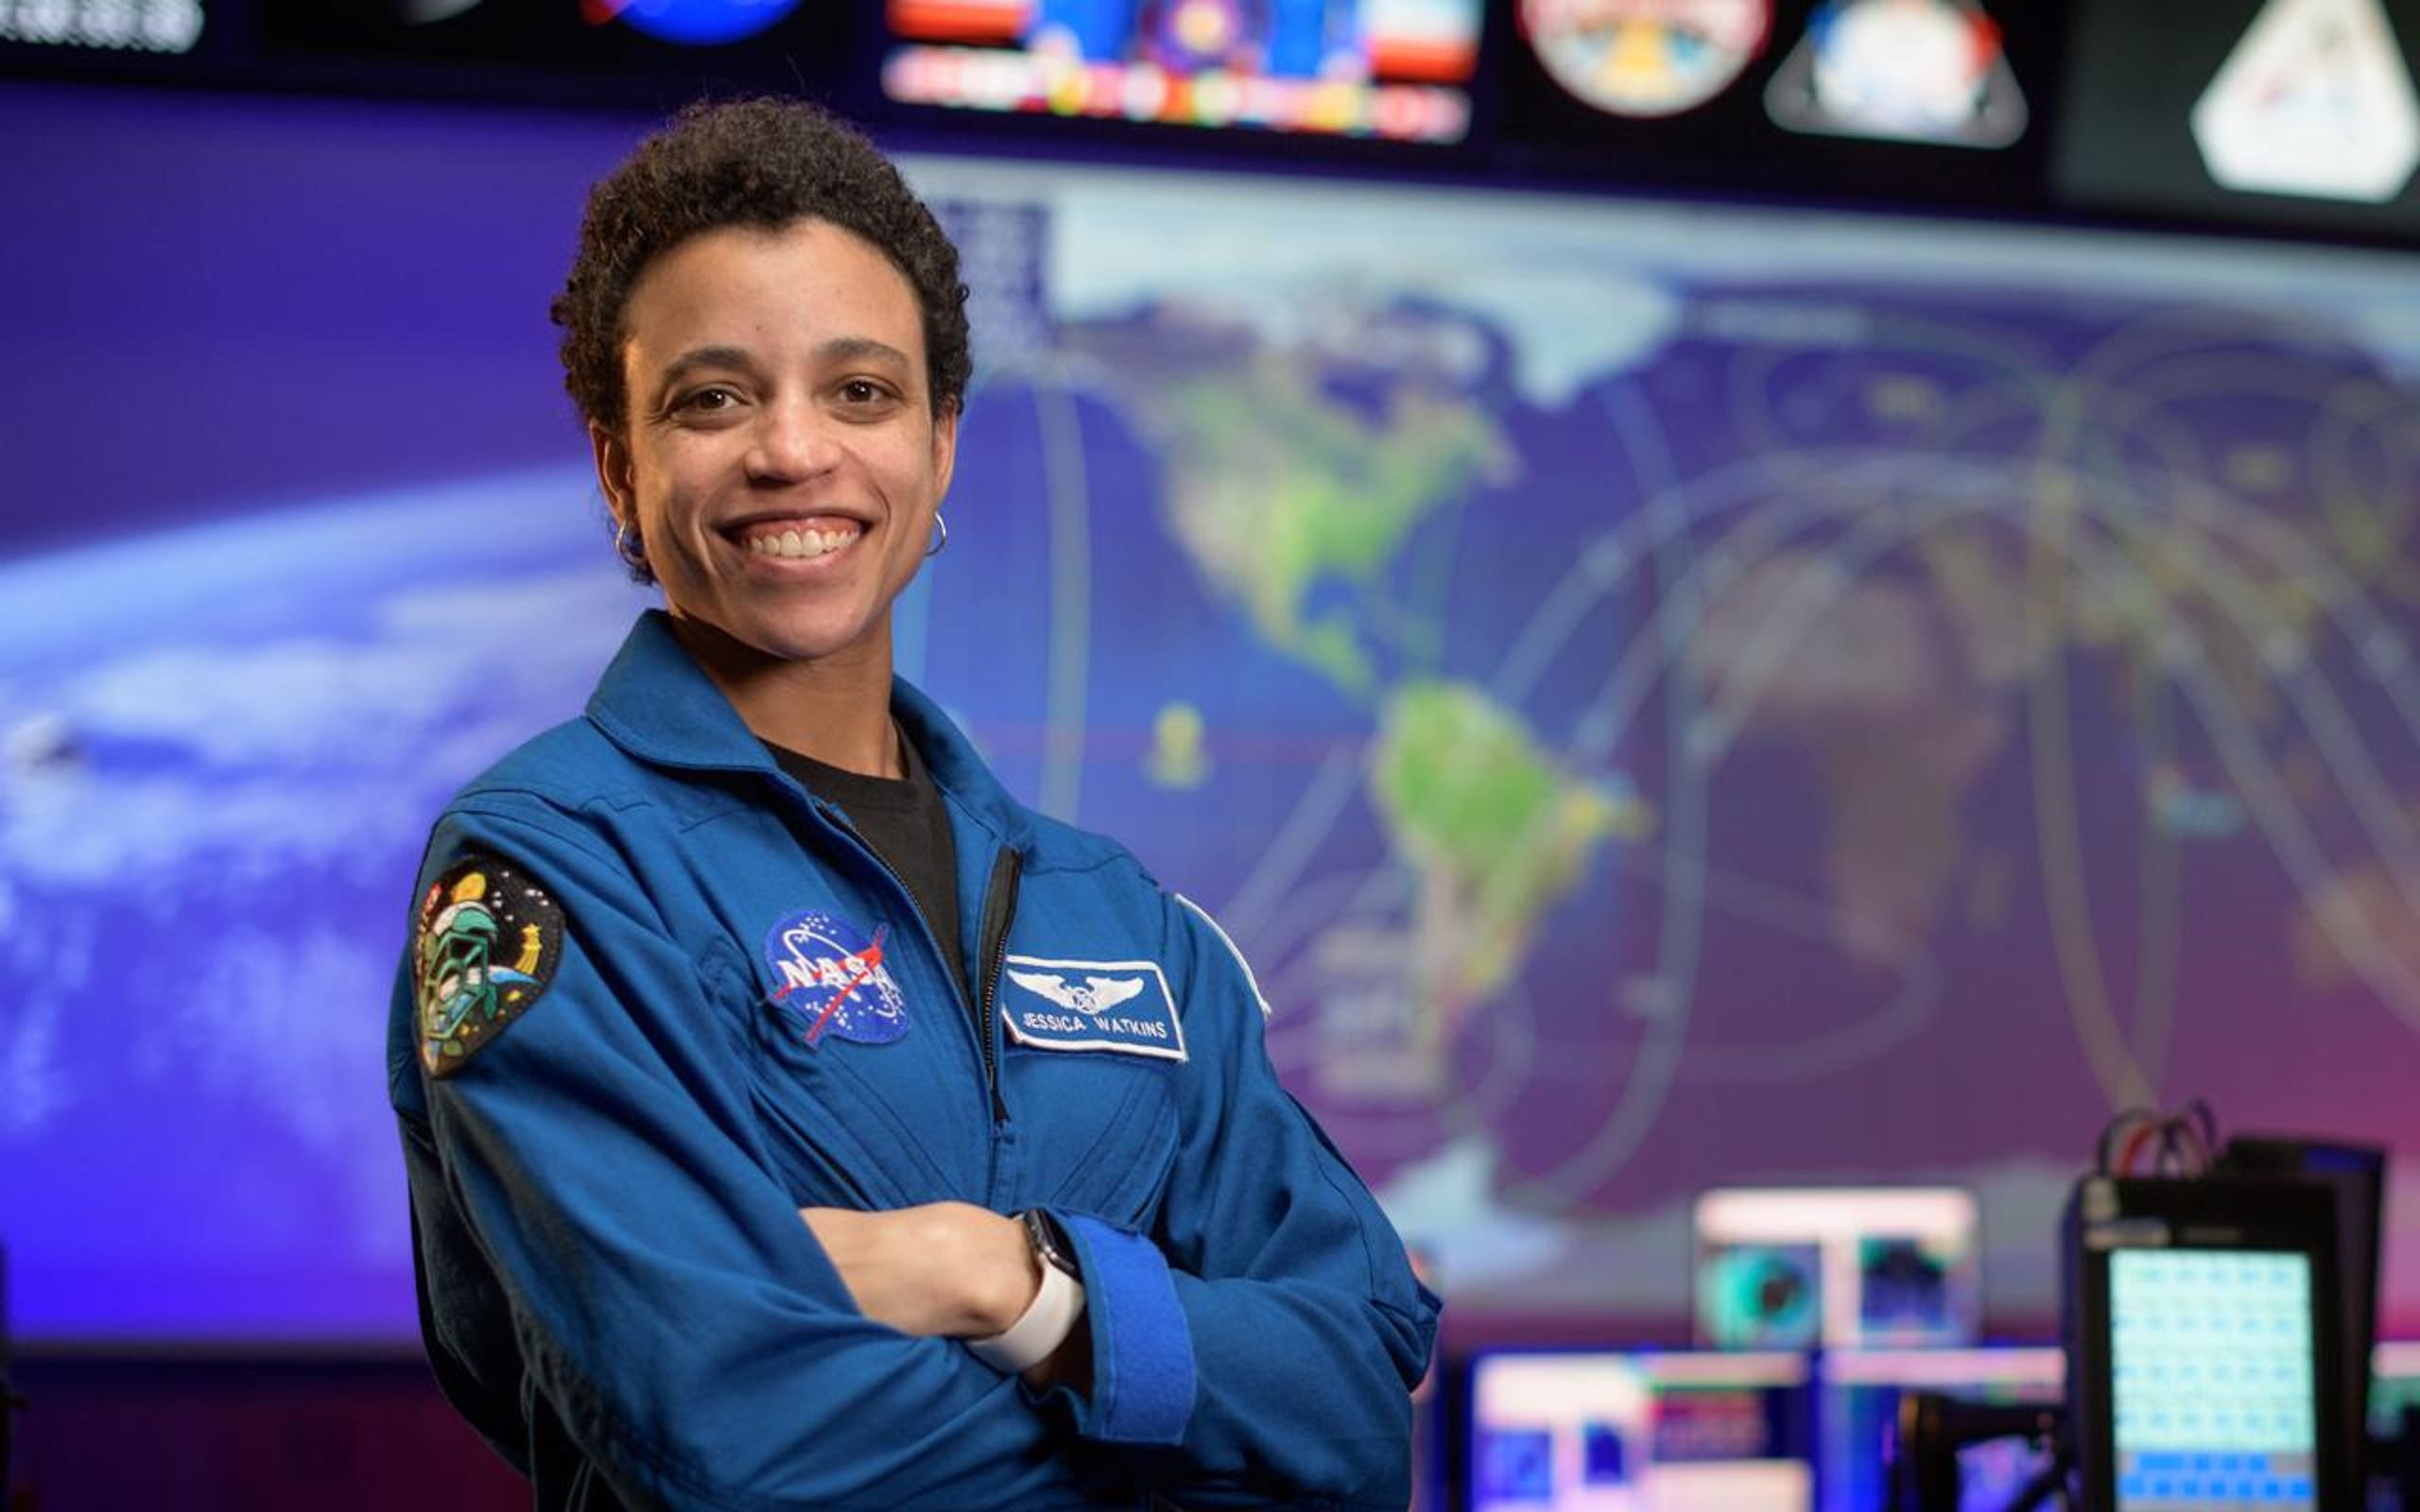 NASA Astronaut Jessica Watkins. The SpaceX Crew-4 mission will mark her first flight to space.